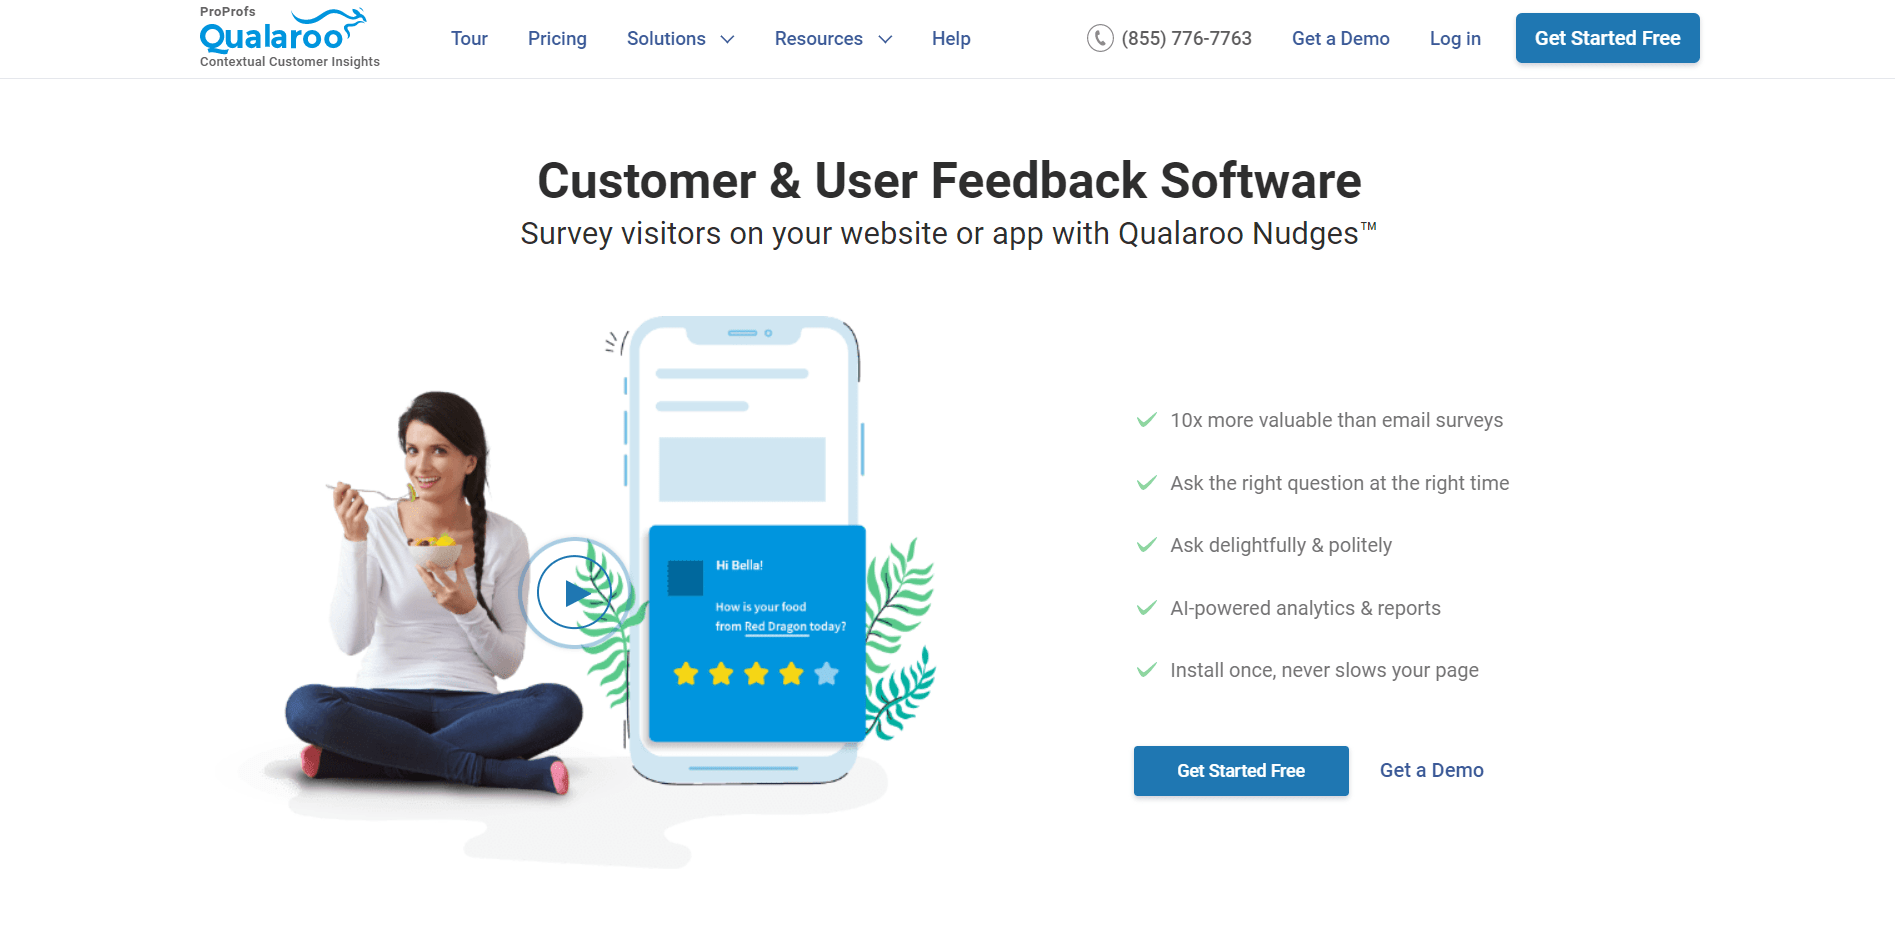 This is the image of the Home page of Qualaroo for an online Customer Experience Management system. 